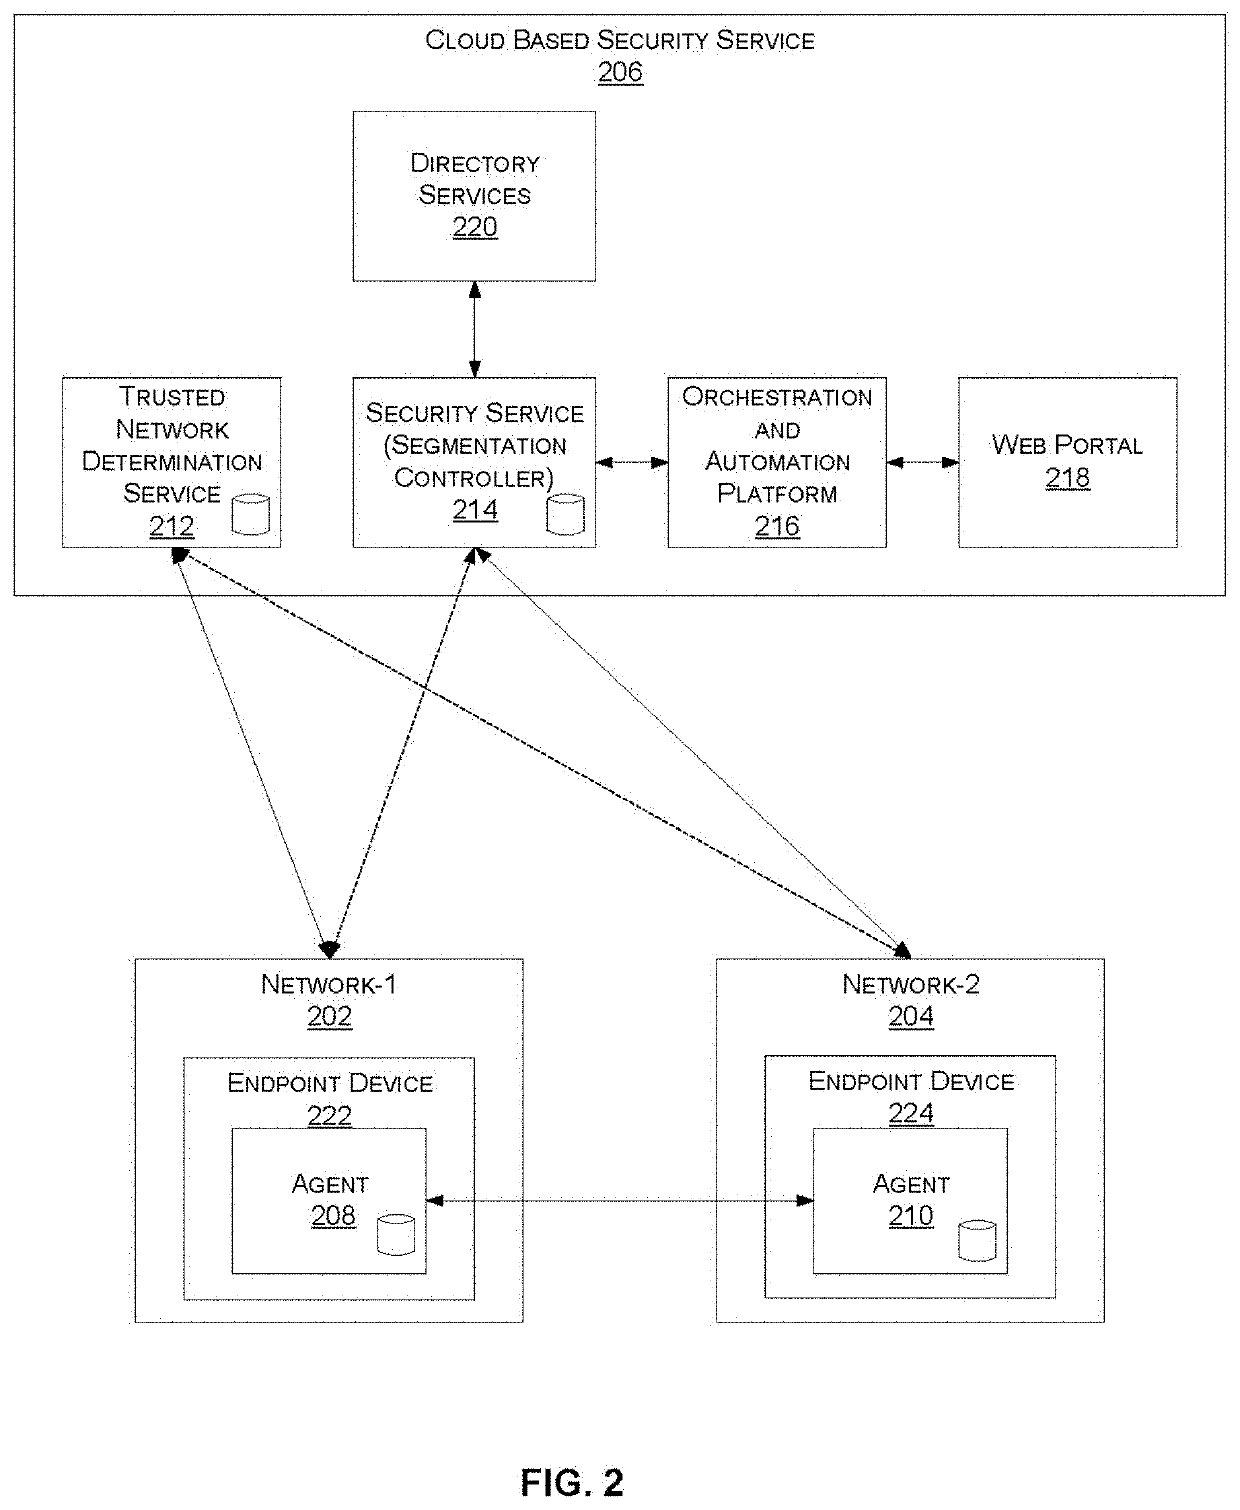 Adjusting behavior of an endpoint security agent based on network location